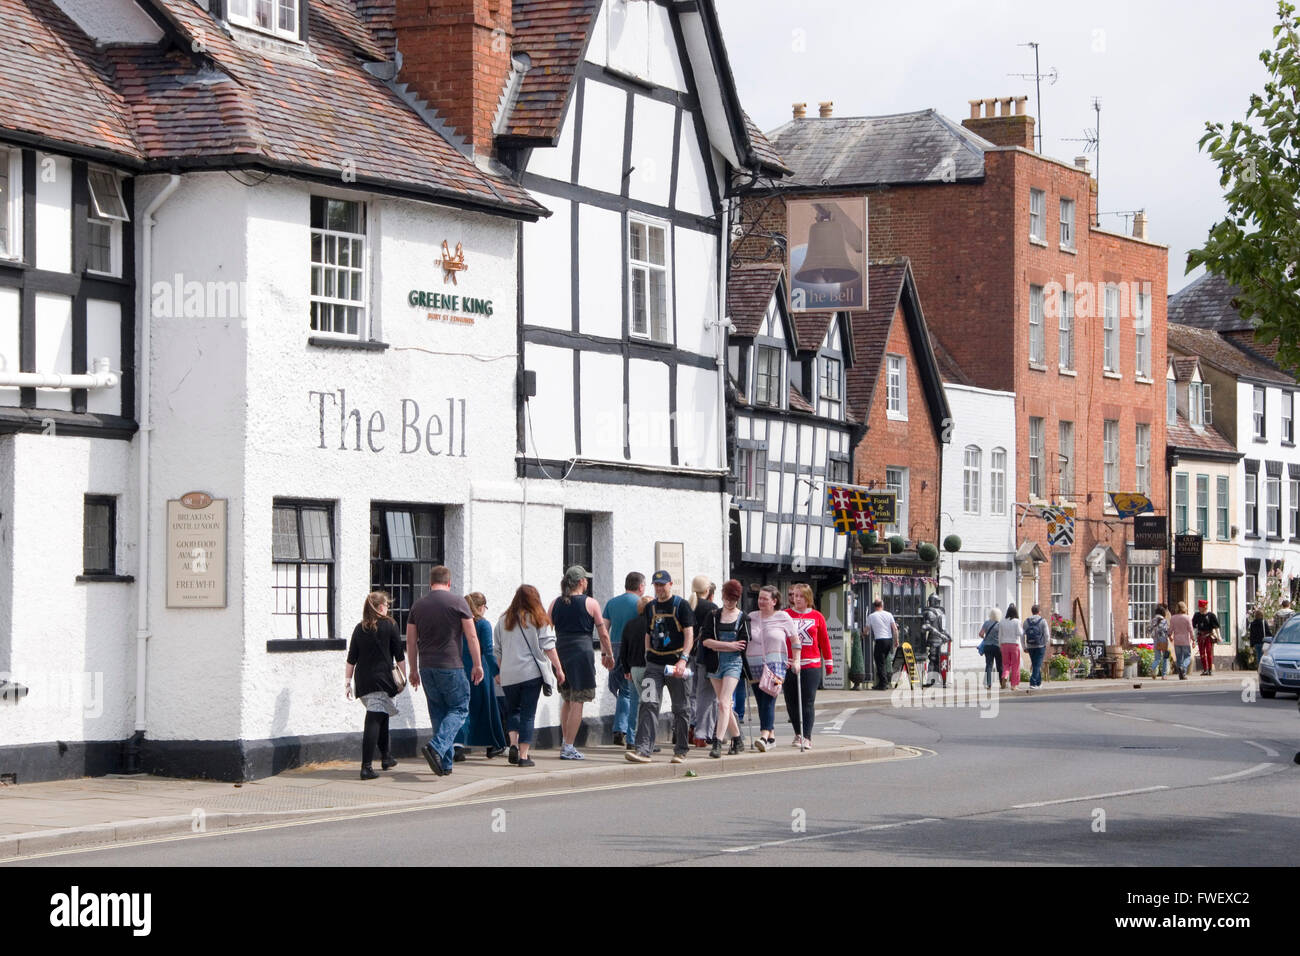 Tewkesbury, UK -July 17, 2015: People gather for the first Medieval Festival Parade on 17 July 2015 at Church Street, Tewkesbury Stock Photo